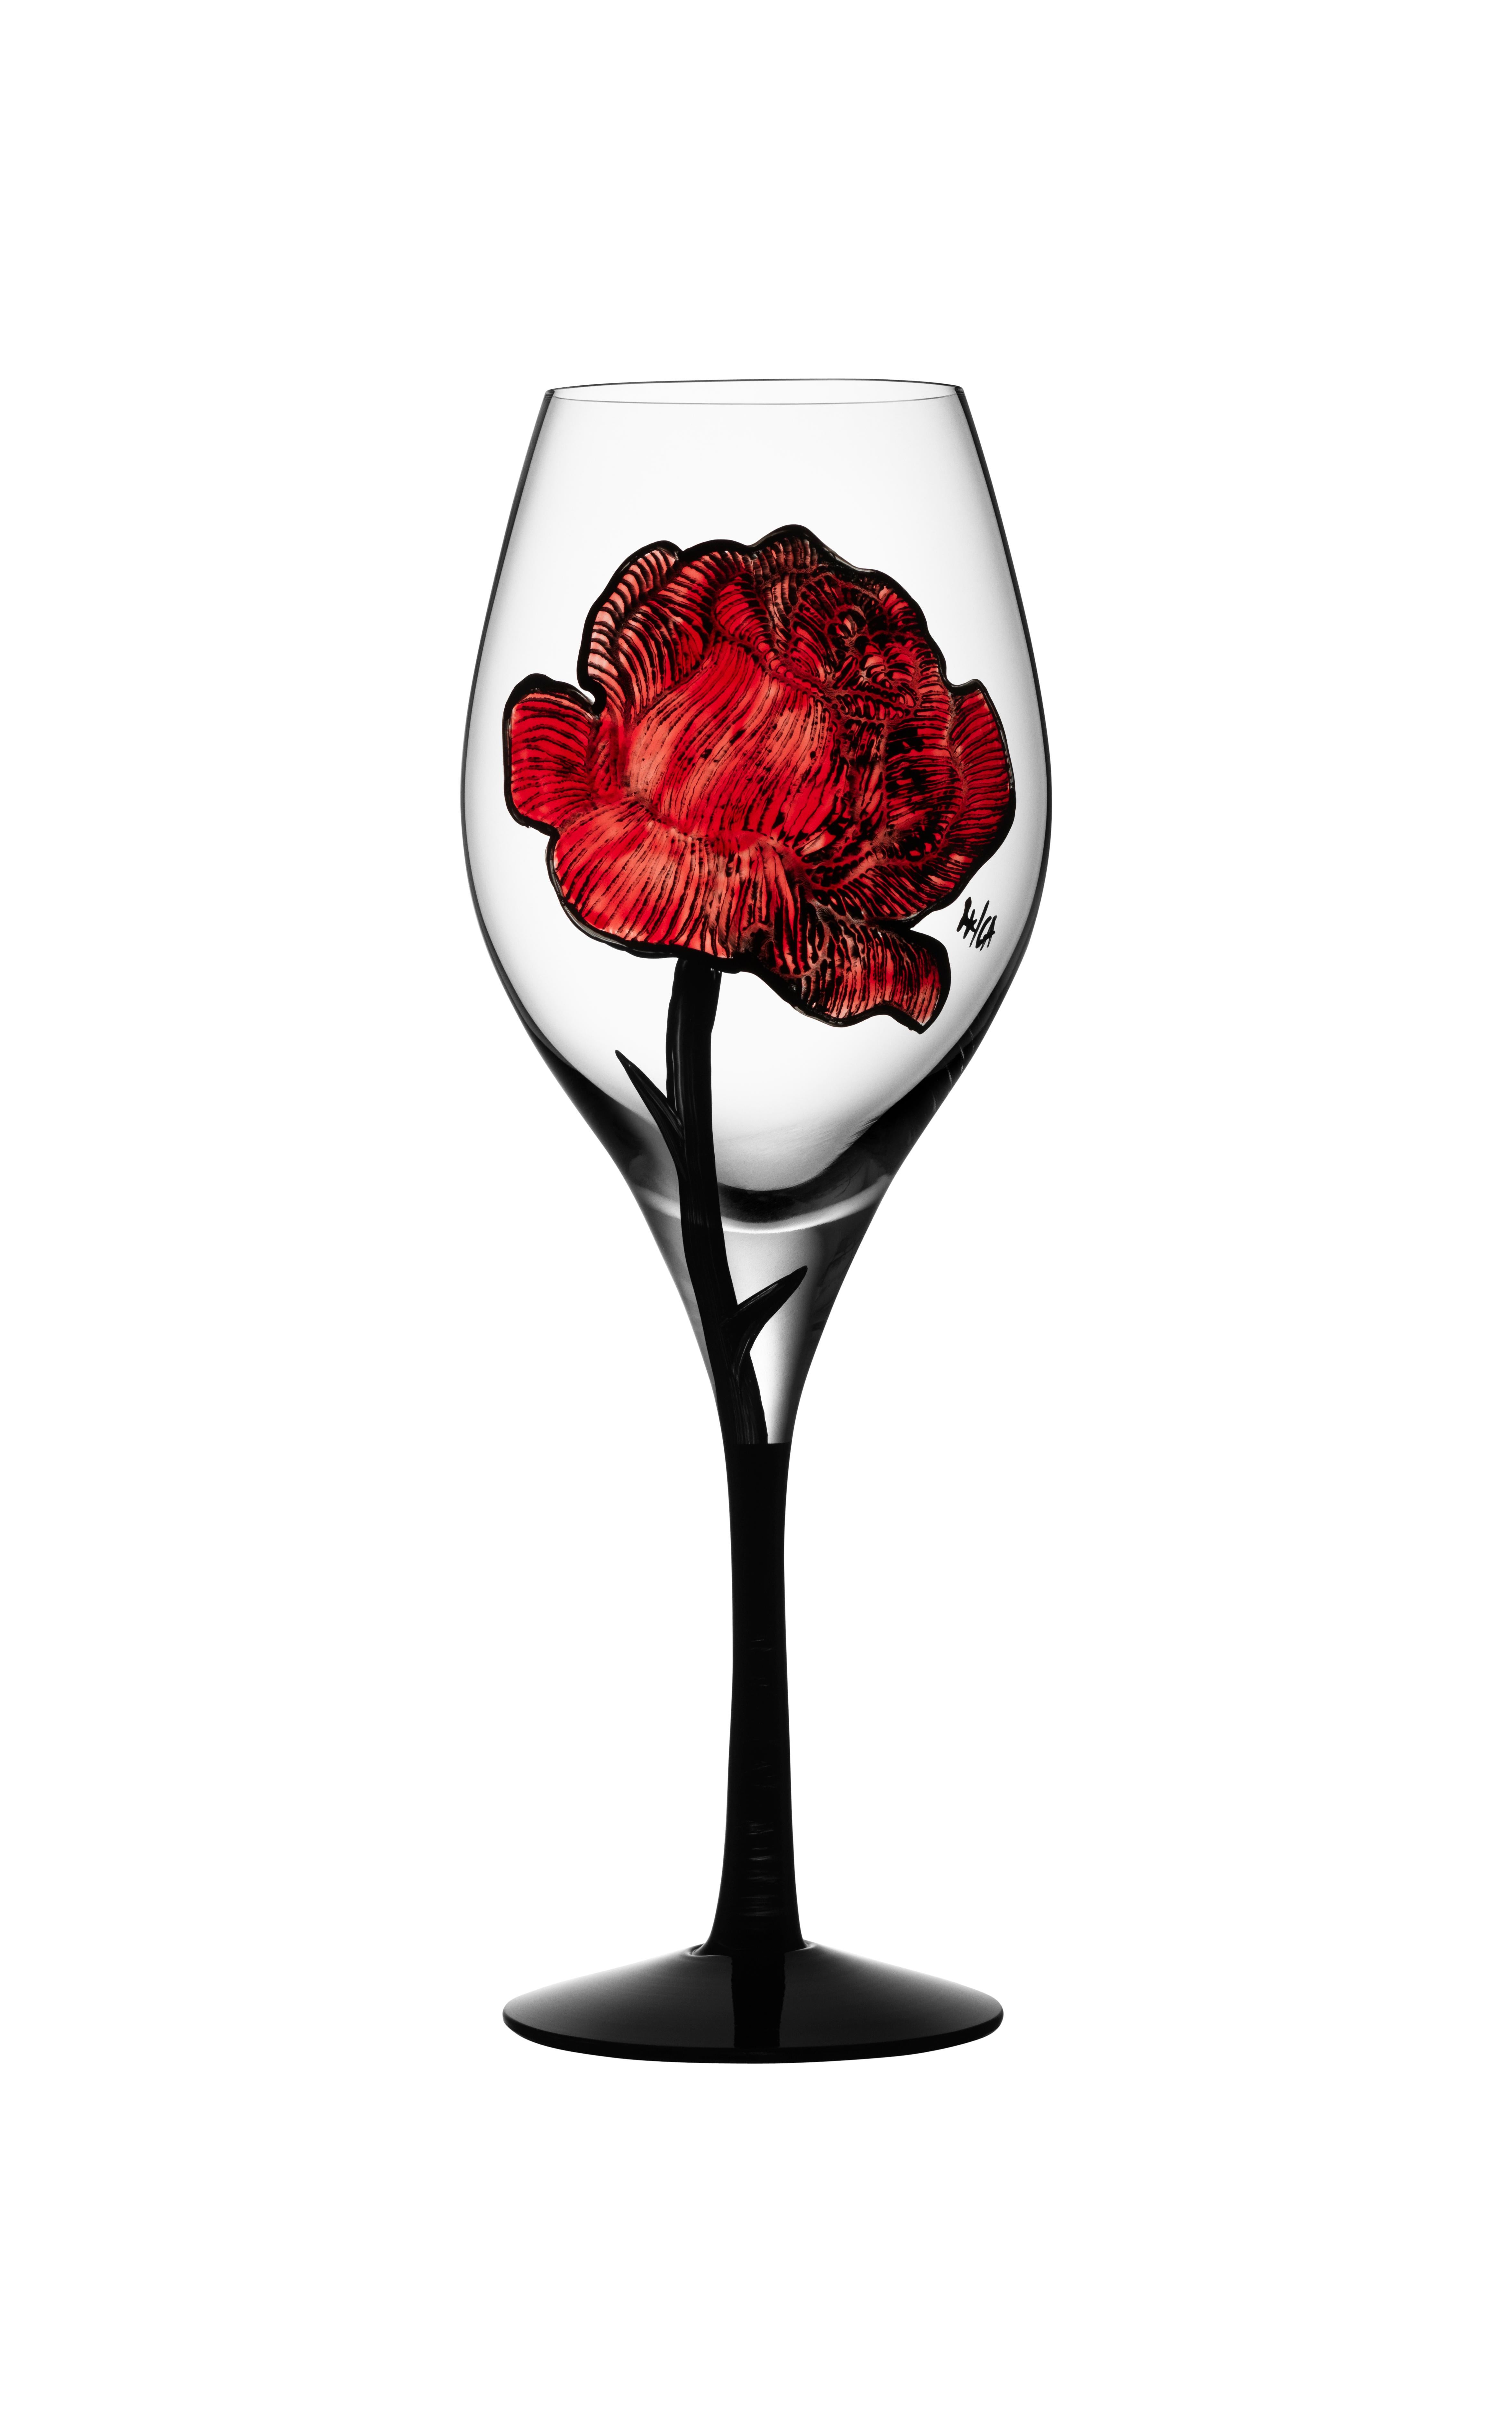 The Tattoo collection from Kosta Boda is inspired by tattoo art. The wine glass is hand-painted in Kosta, Sweden, and offers a creative combination of romance and rock ‘n’ roll. Good things should last forever! Design by Ludvig Löfgren.
